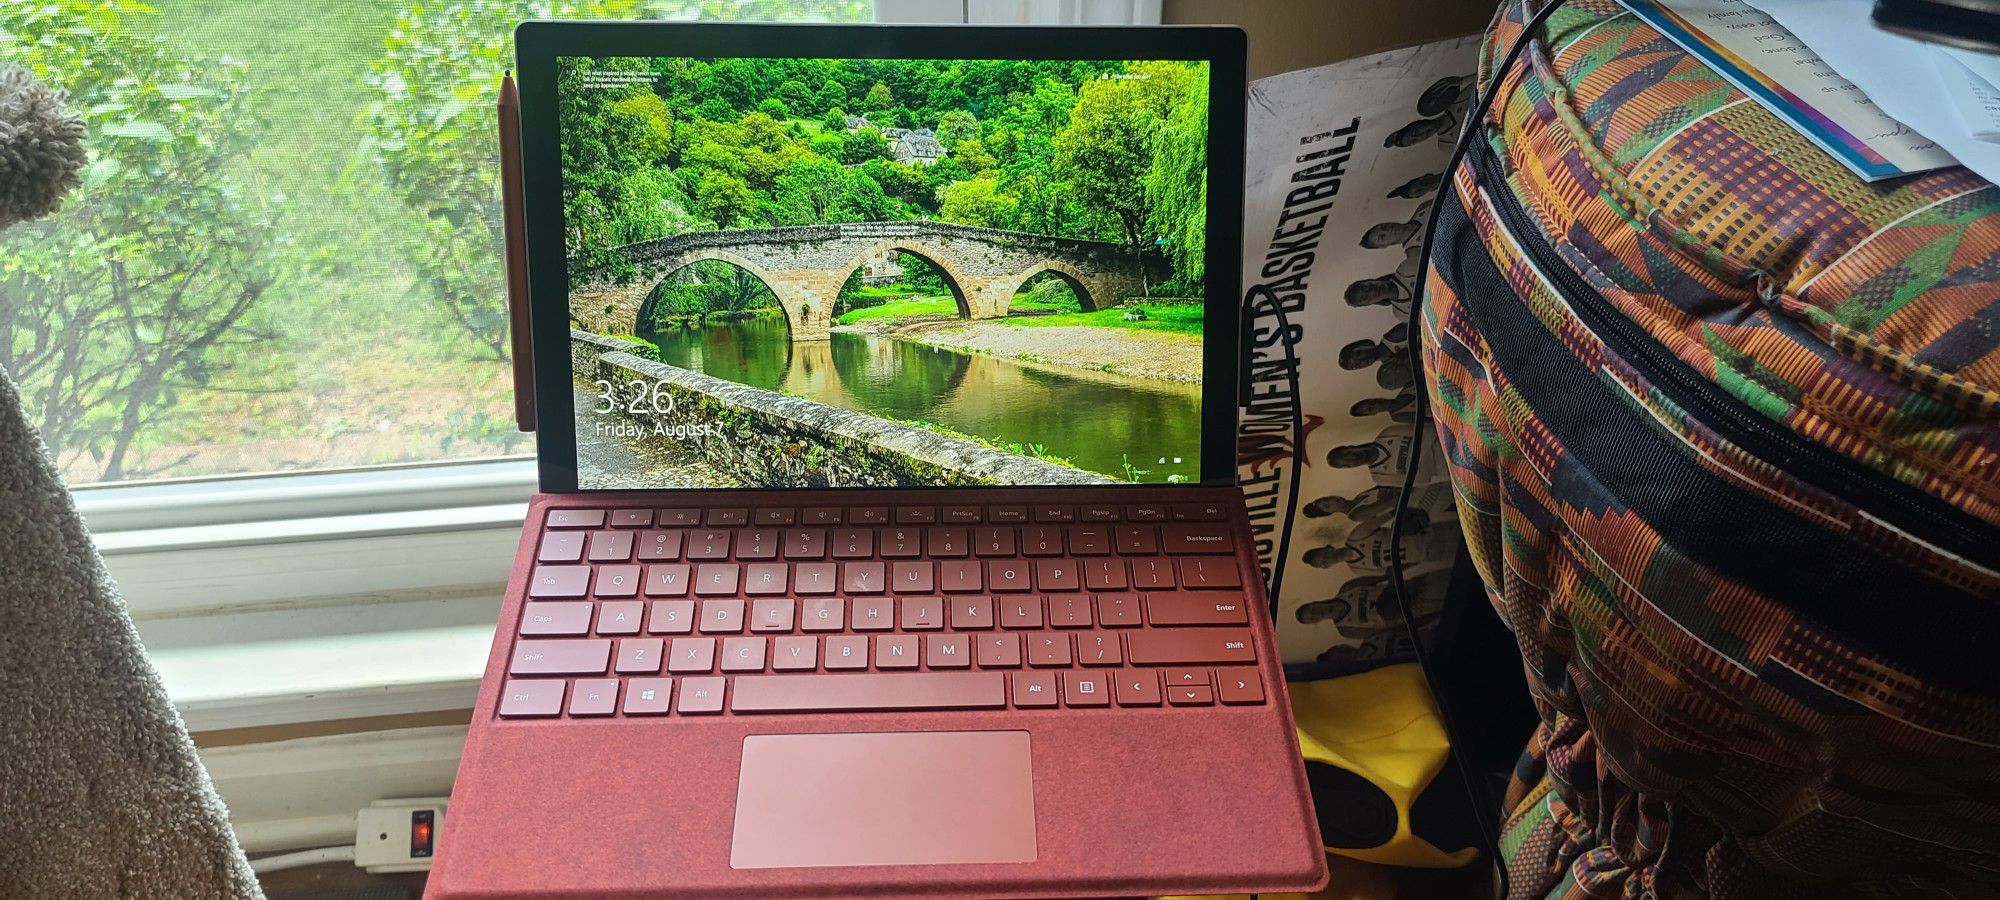 Microsoft Surface Pro 7 i5 8gb 128gb Tablet Laptop with Keyboard and Pen.